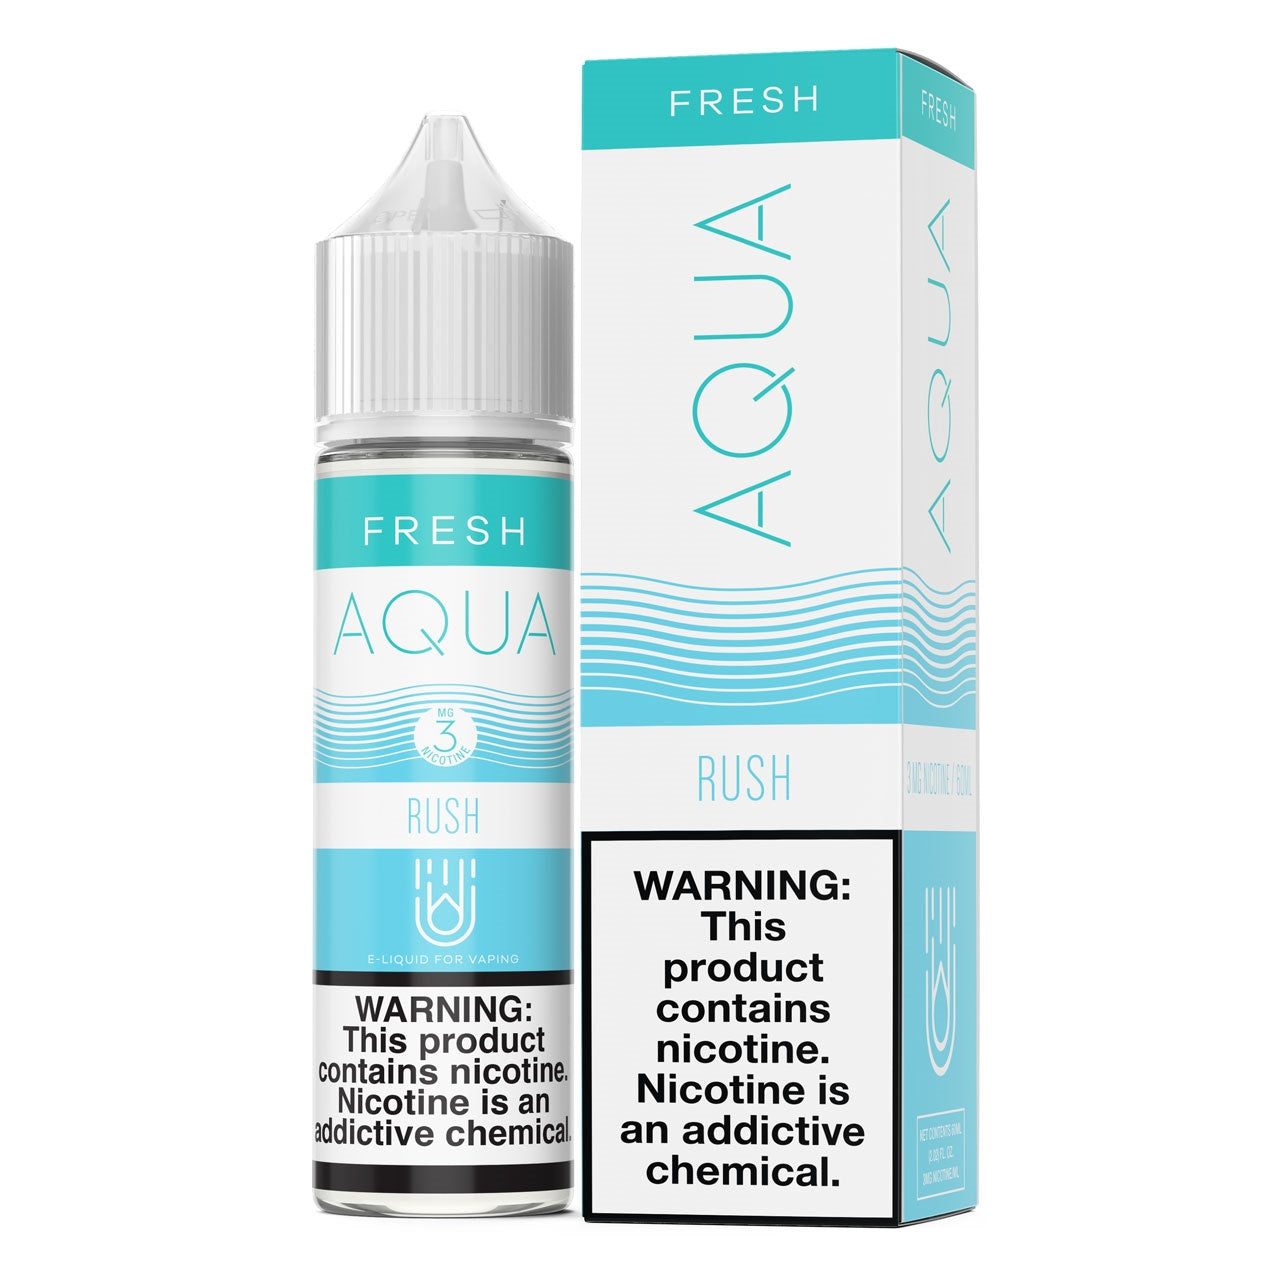 Rush by Aqua Series 60mL with Packaging